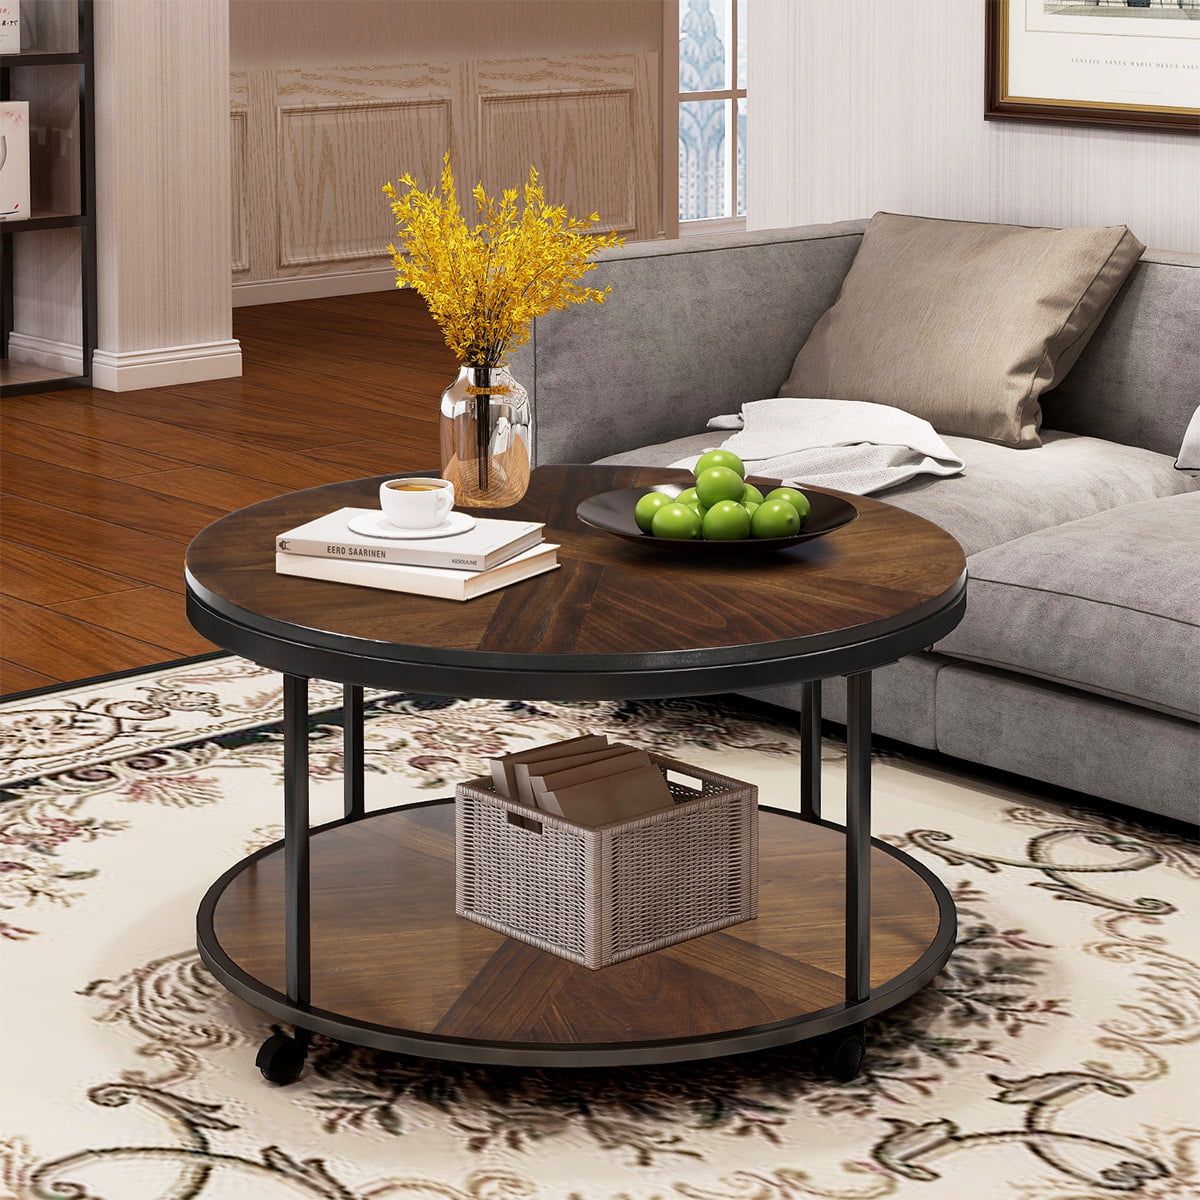 Sentern Round Coffee Table With Caster Wheels And Unique Textured Regarding Round Coffee Tables (Gallery 3 of 20)